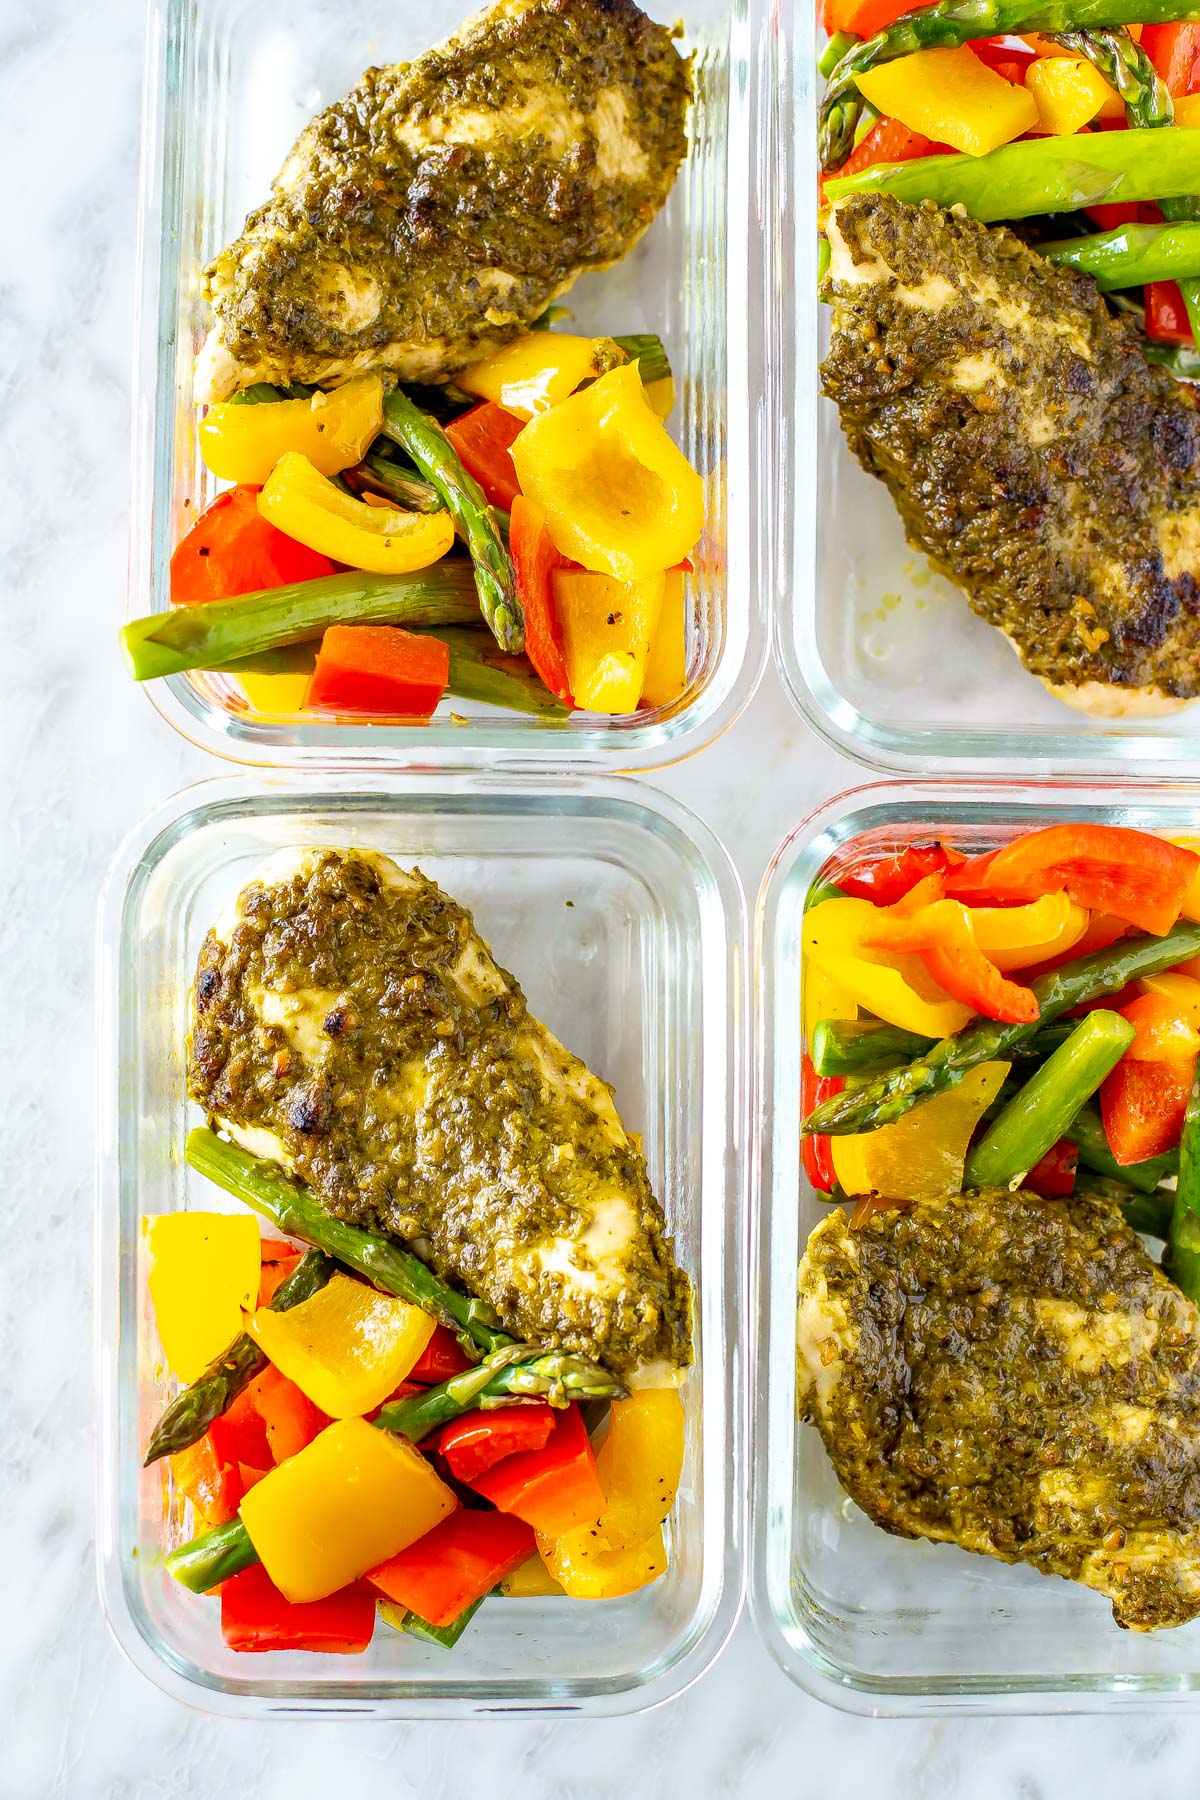 Pesto coated chicken cutlets with asparagus, red pepper and yellow pepper in square glass meal prep containers, zoomed in on the bottom left hand corner.